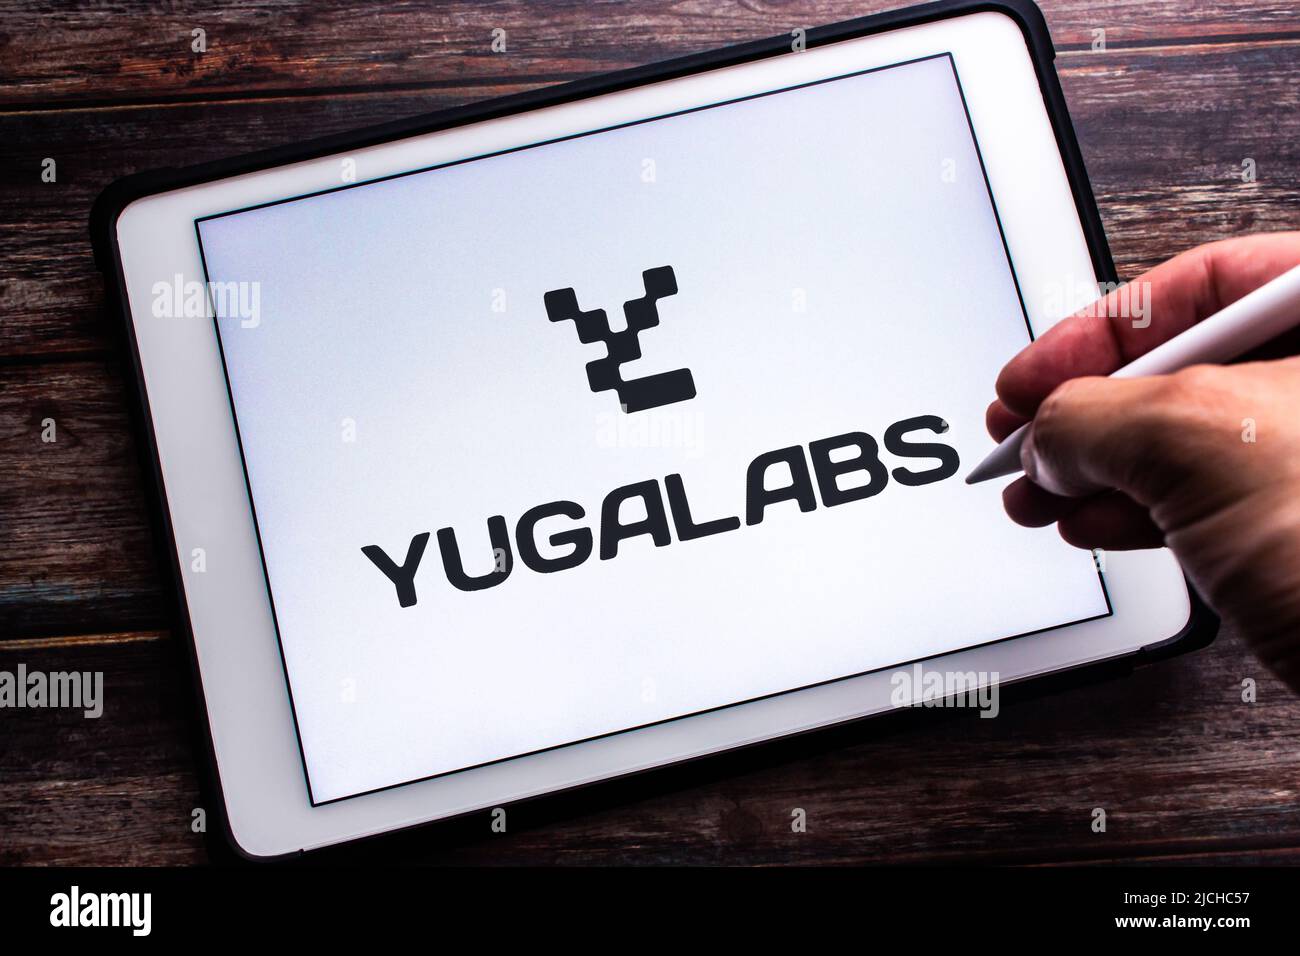 The logo of Yuga Labs (The parent company of Bored Ape Yacht Club) on a tablet on a wooden table. Man hand holding wireless stylus Stock Photo